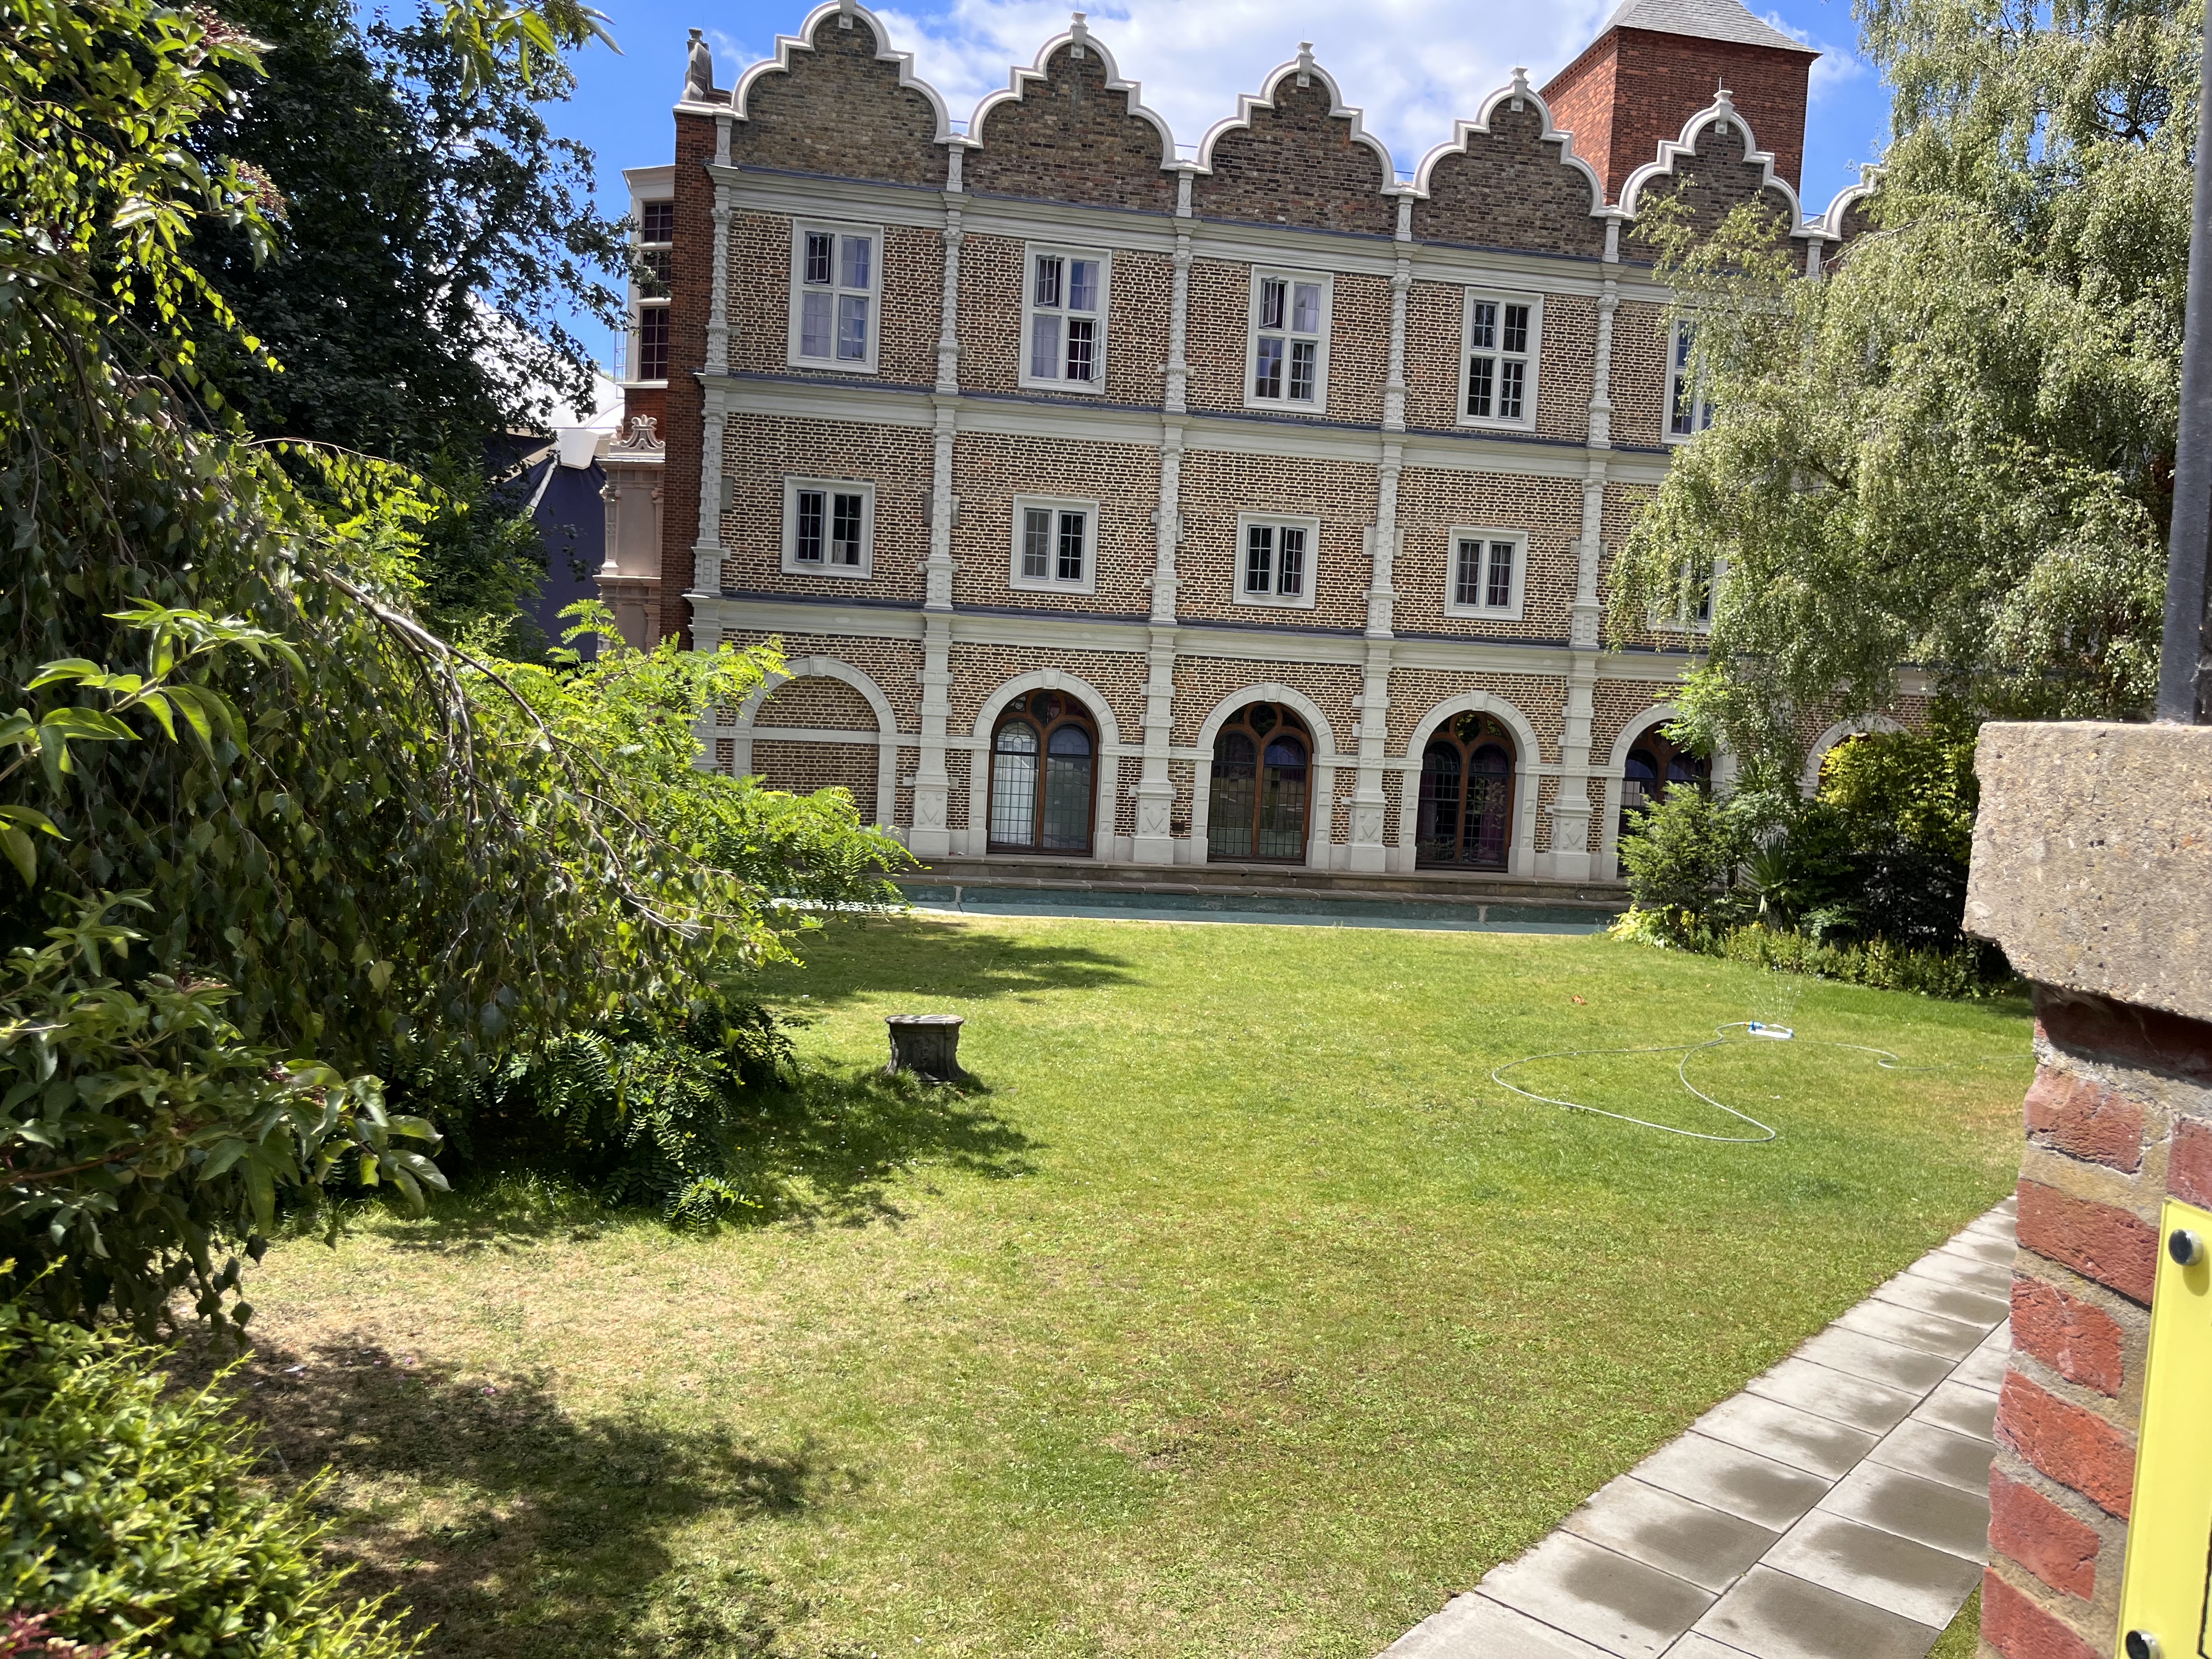 Picture of a place: Safestay Holland Park